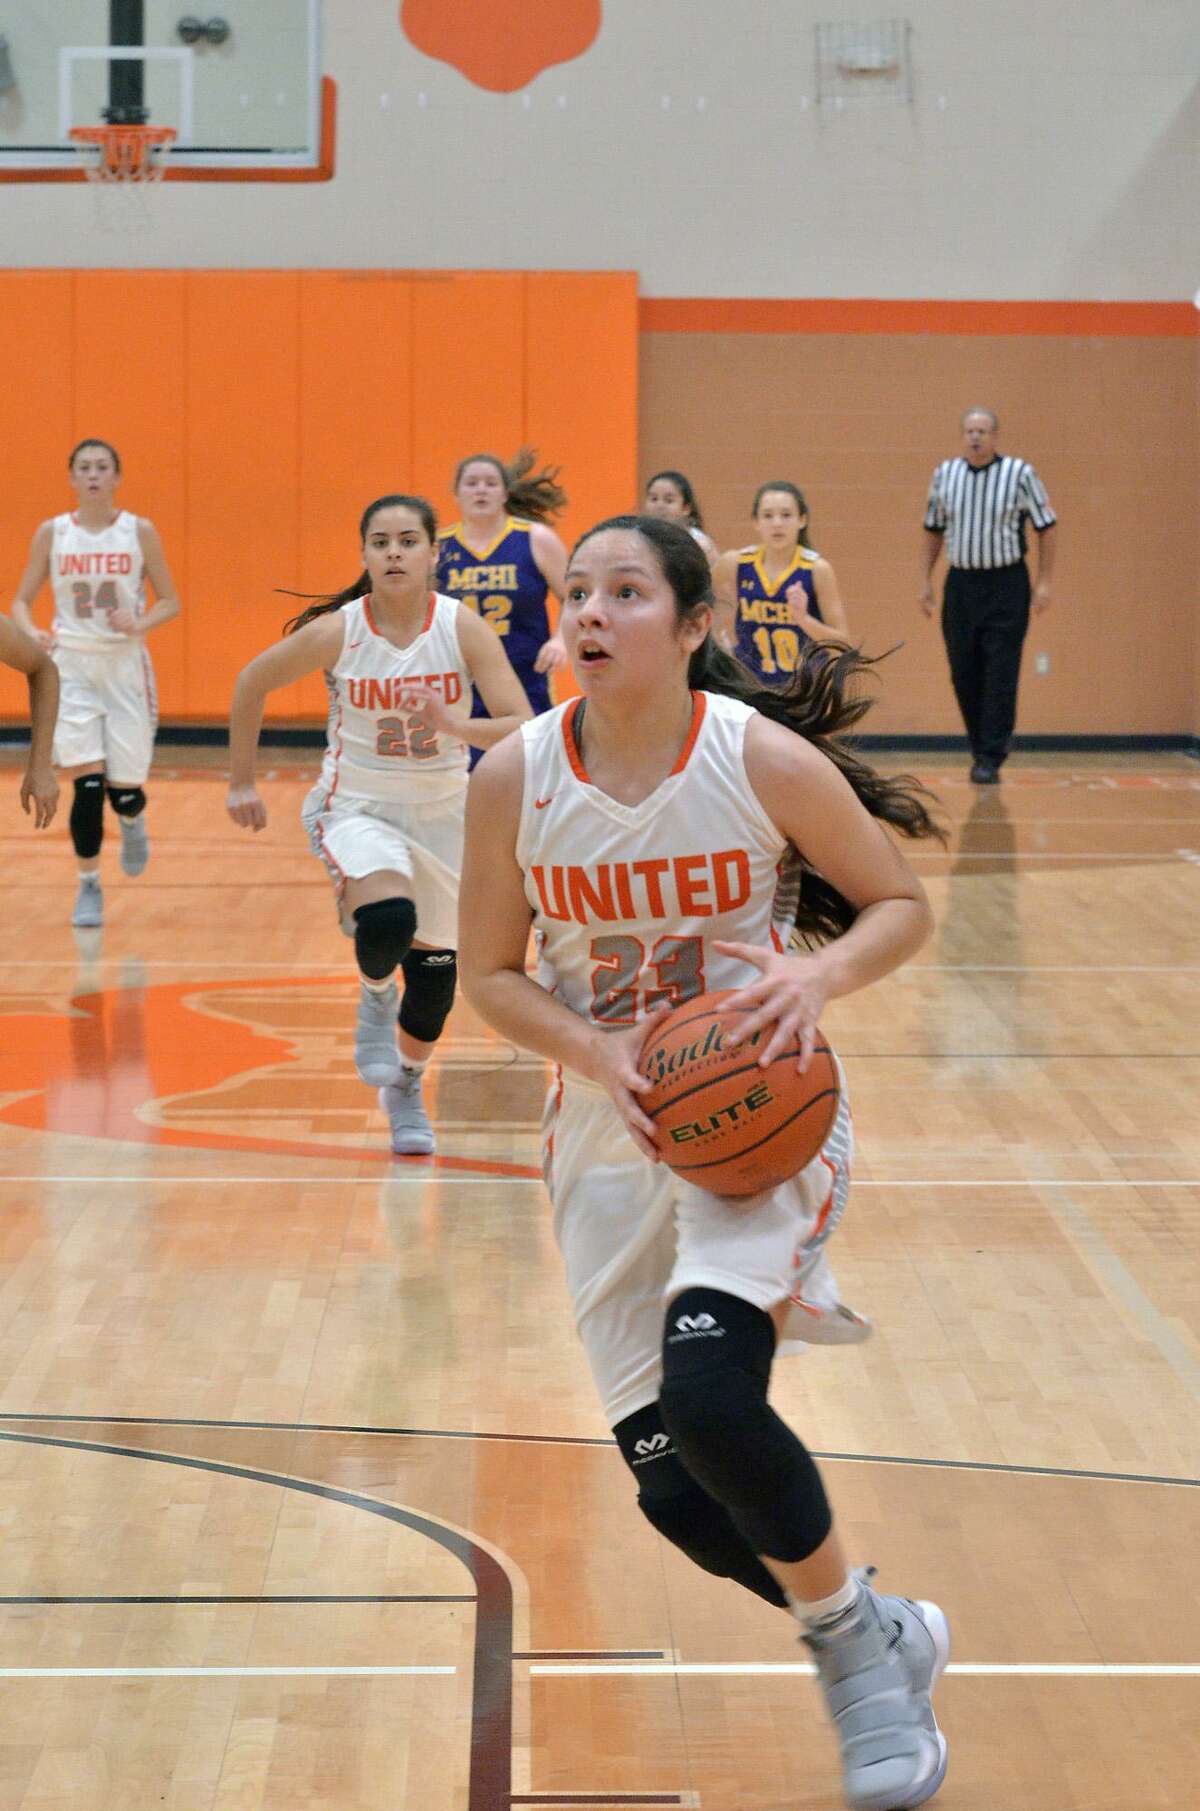 Natalia Treviño had 27 points as United won for the second time this week blowing out McAllen 92-37 on the road.